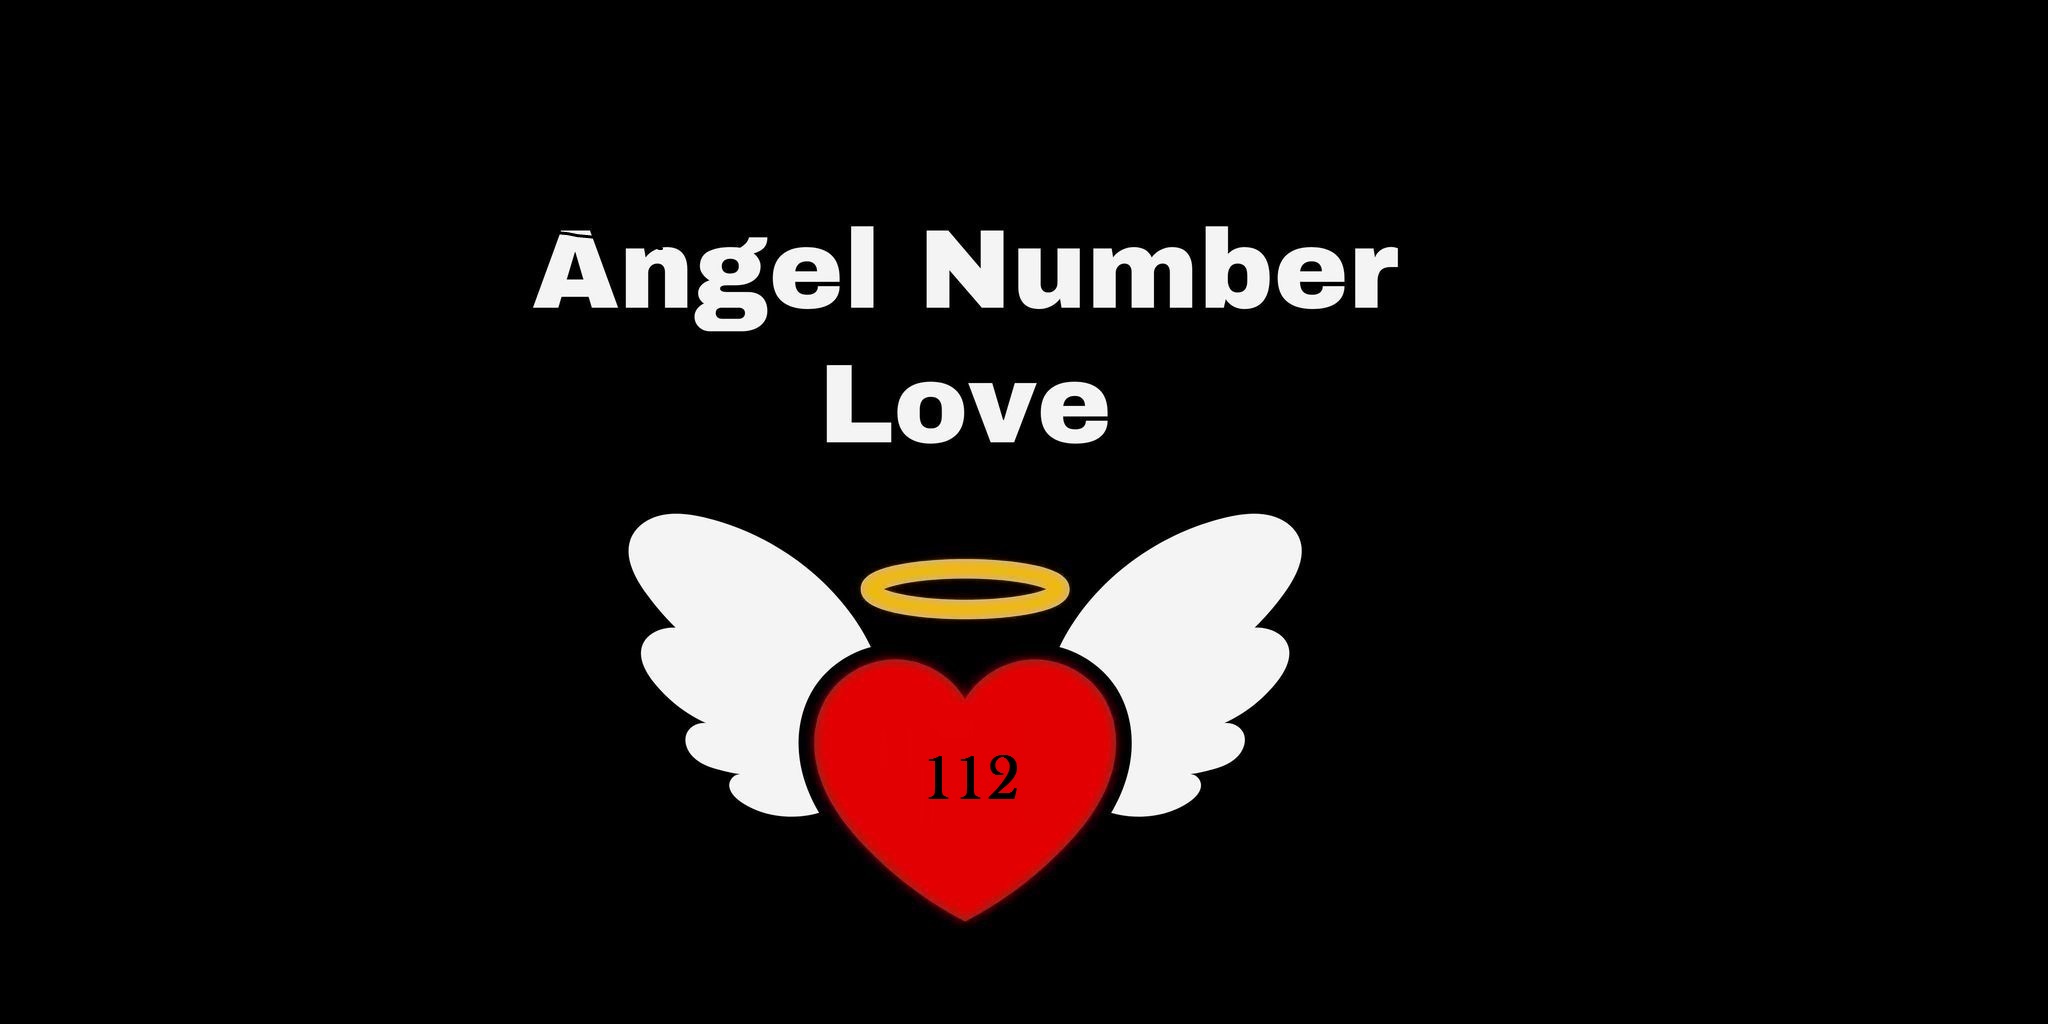 112 Angel Number Meaning In Love & Relationship